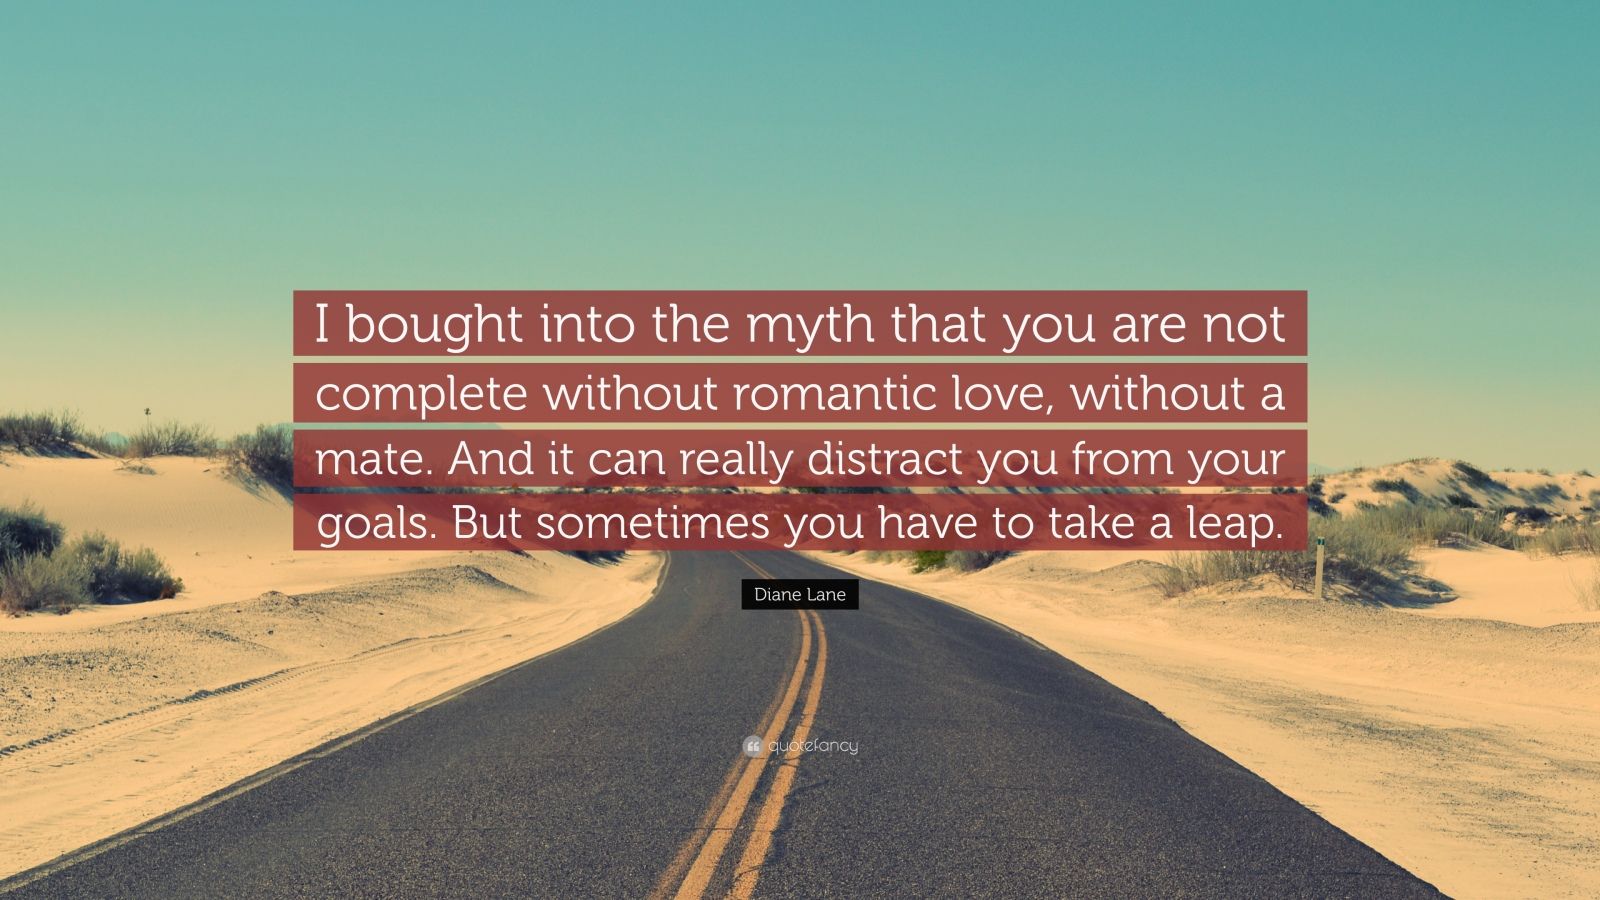 Diane Lane Quote “I bought into the myth that you are not plete without